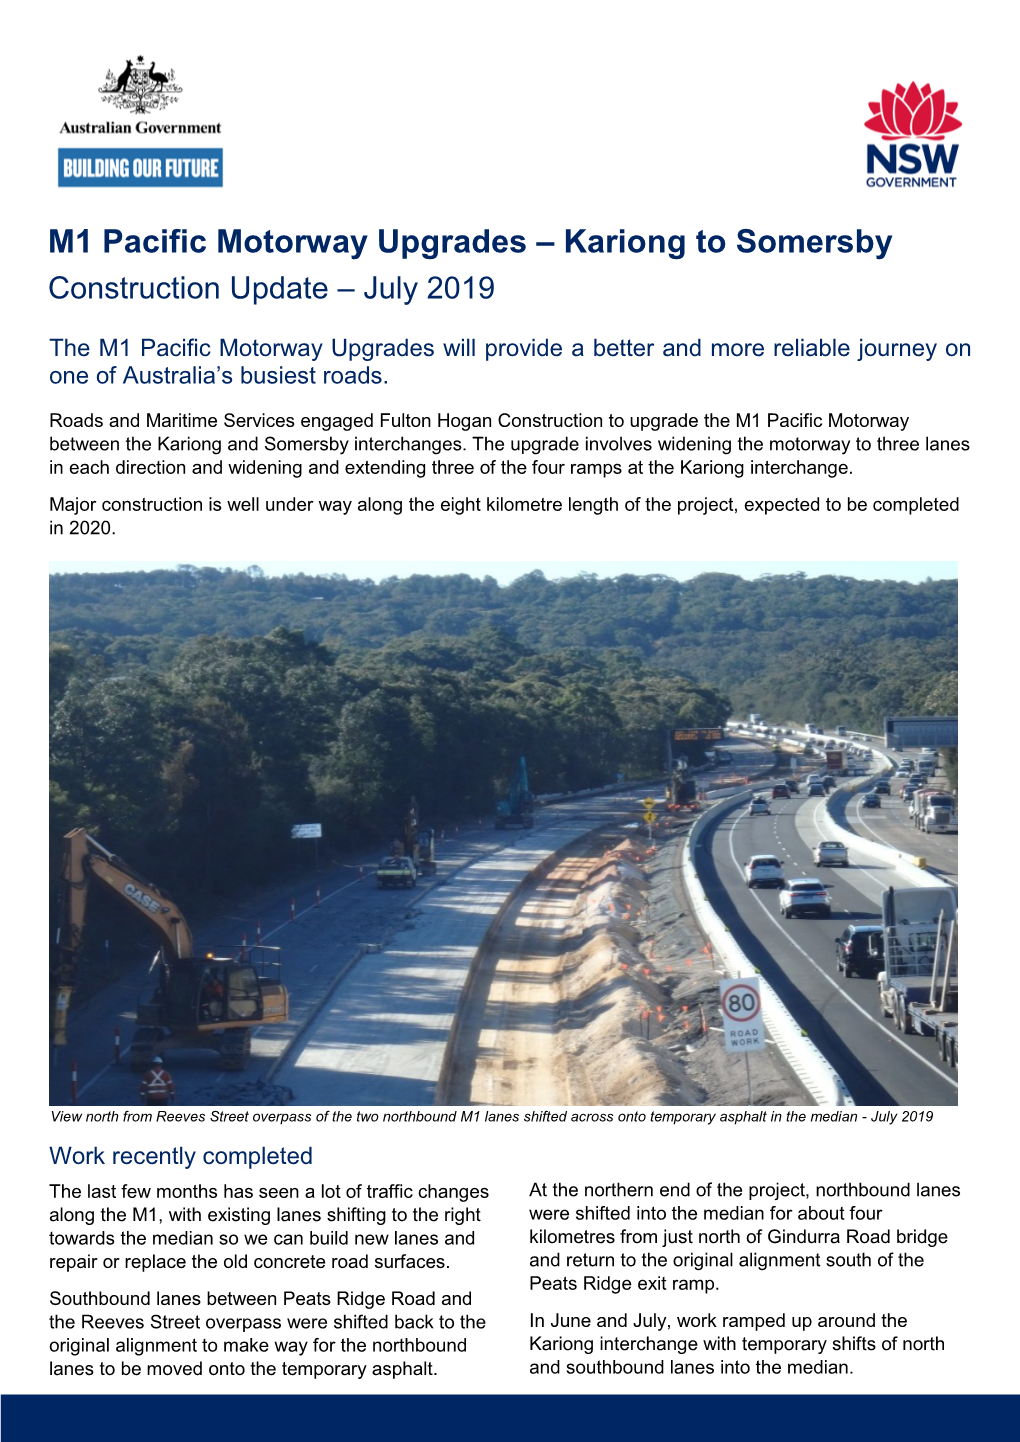 M1 Pacific Motorway Upgrades – Kariong to Somersby Construction Update – July 2019